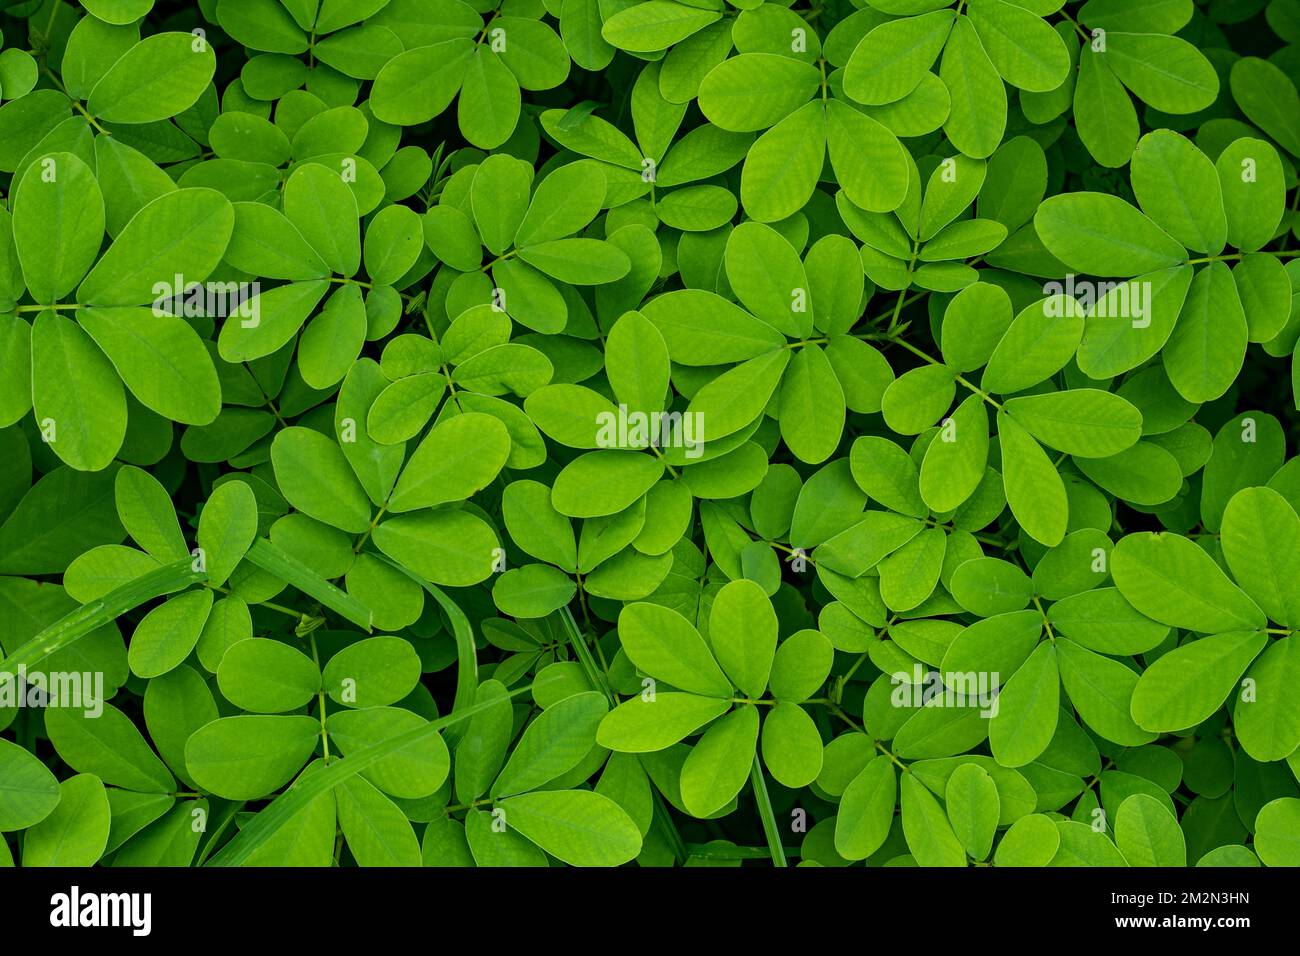 Arachis Pintoi leaf. Tropical Seeds. Common name Pinto Peanut. A legume for use in pastures, soil improvement, and conservation, and as a cover crop i Stock Photo